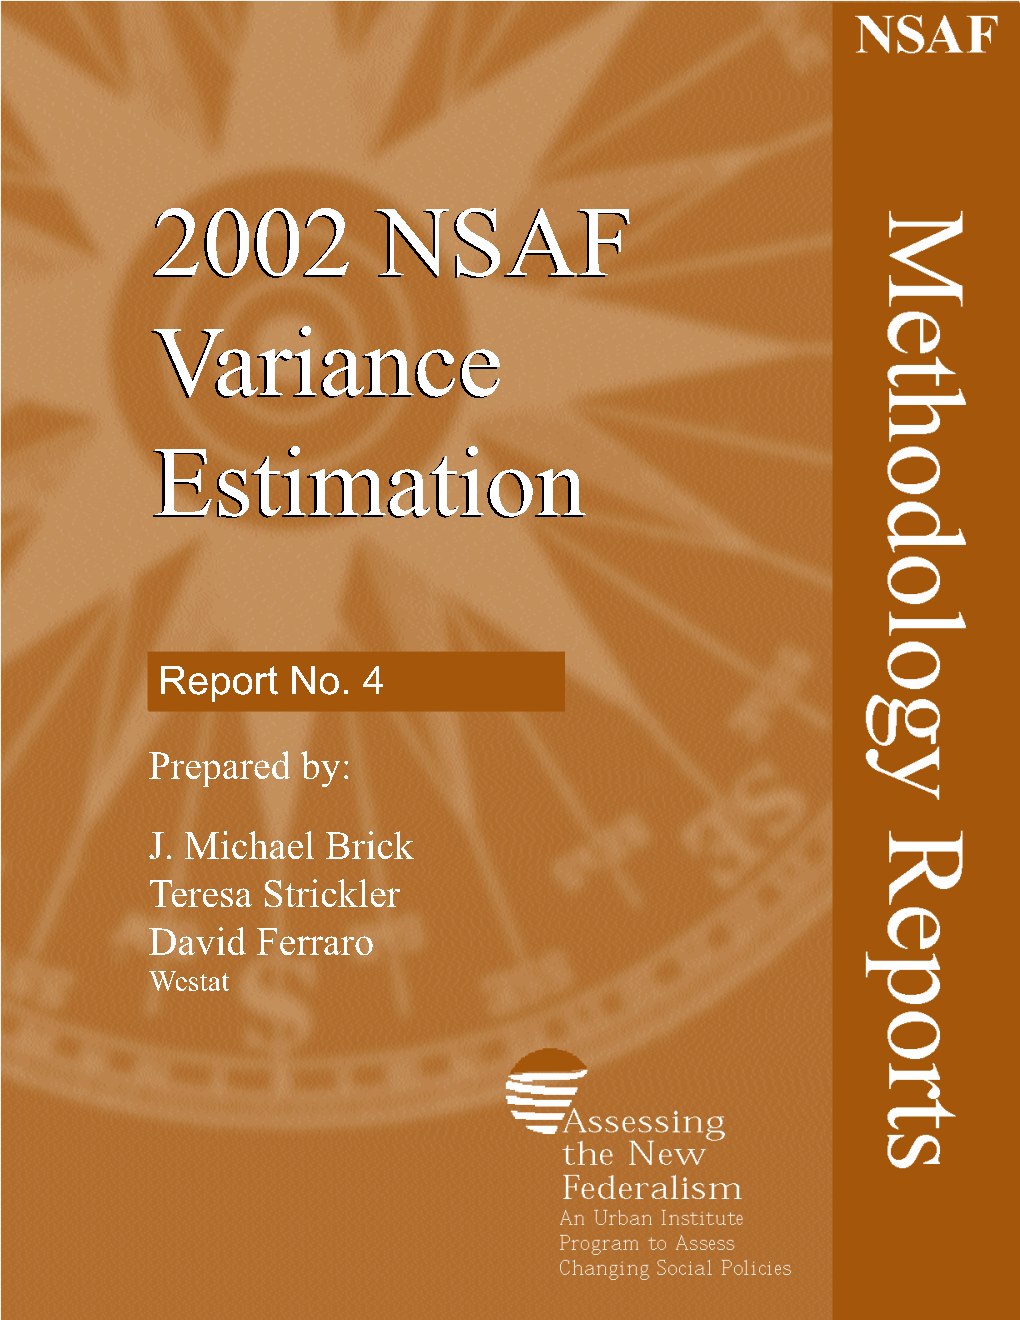 2002 NSAF Variance Estimation Is the Fourth Report in a Series Describing the Methodology of the 2002 National Survey of America’S Families (NSAF)